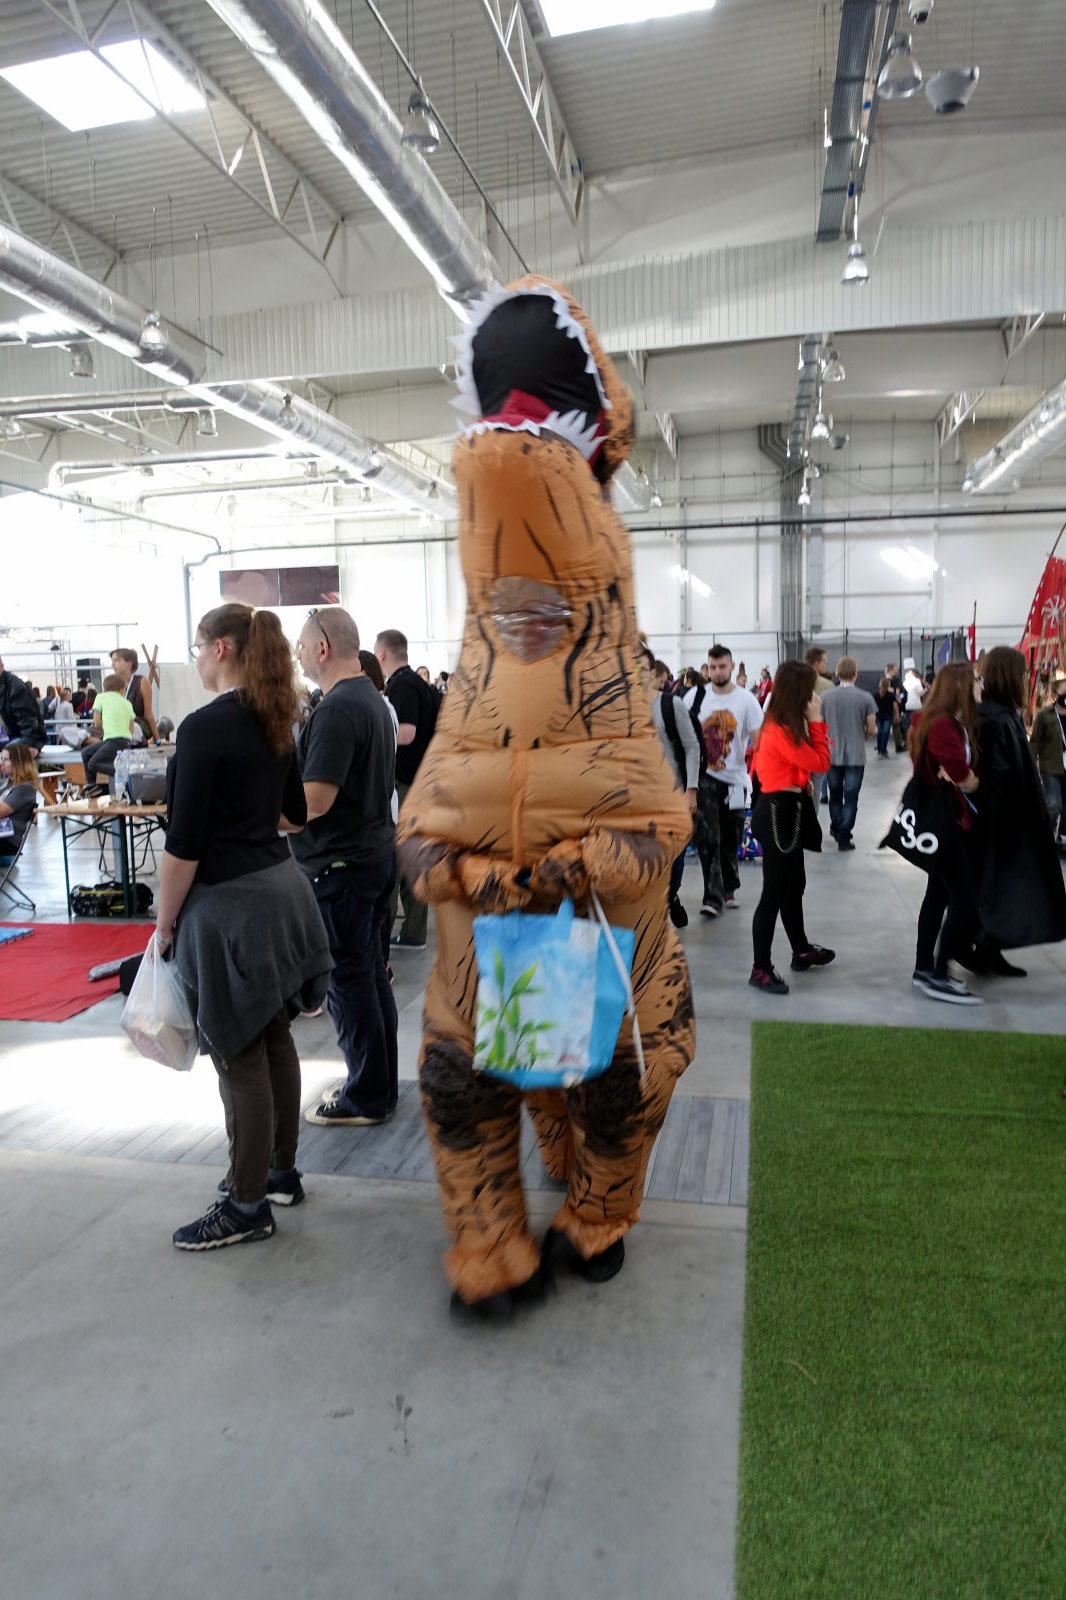 A person in an inflatable T-rex costume with a bag in their hands. There are multiple people around.